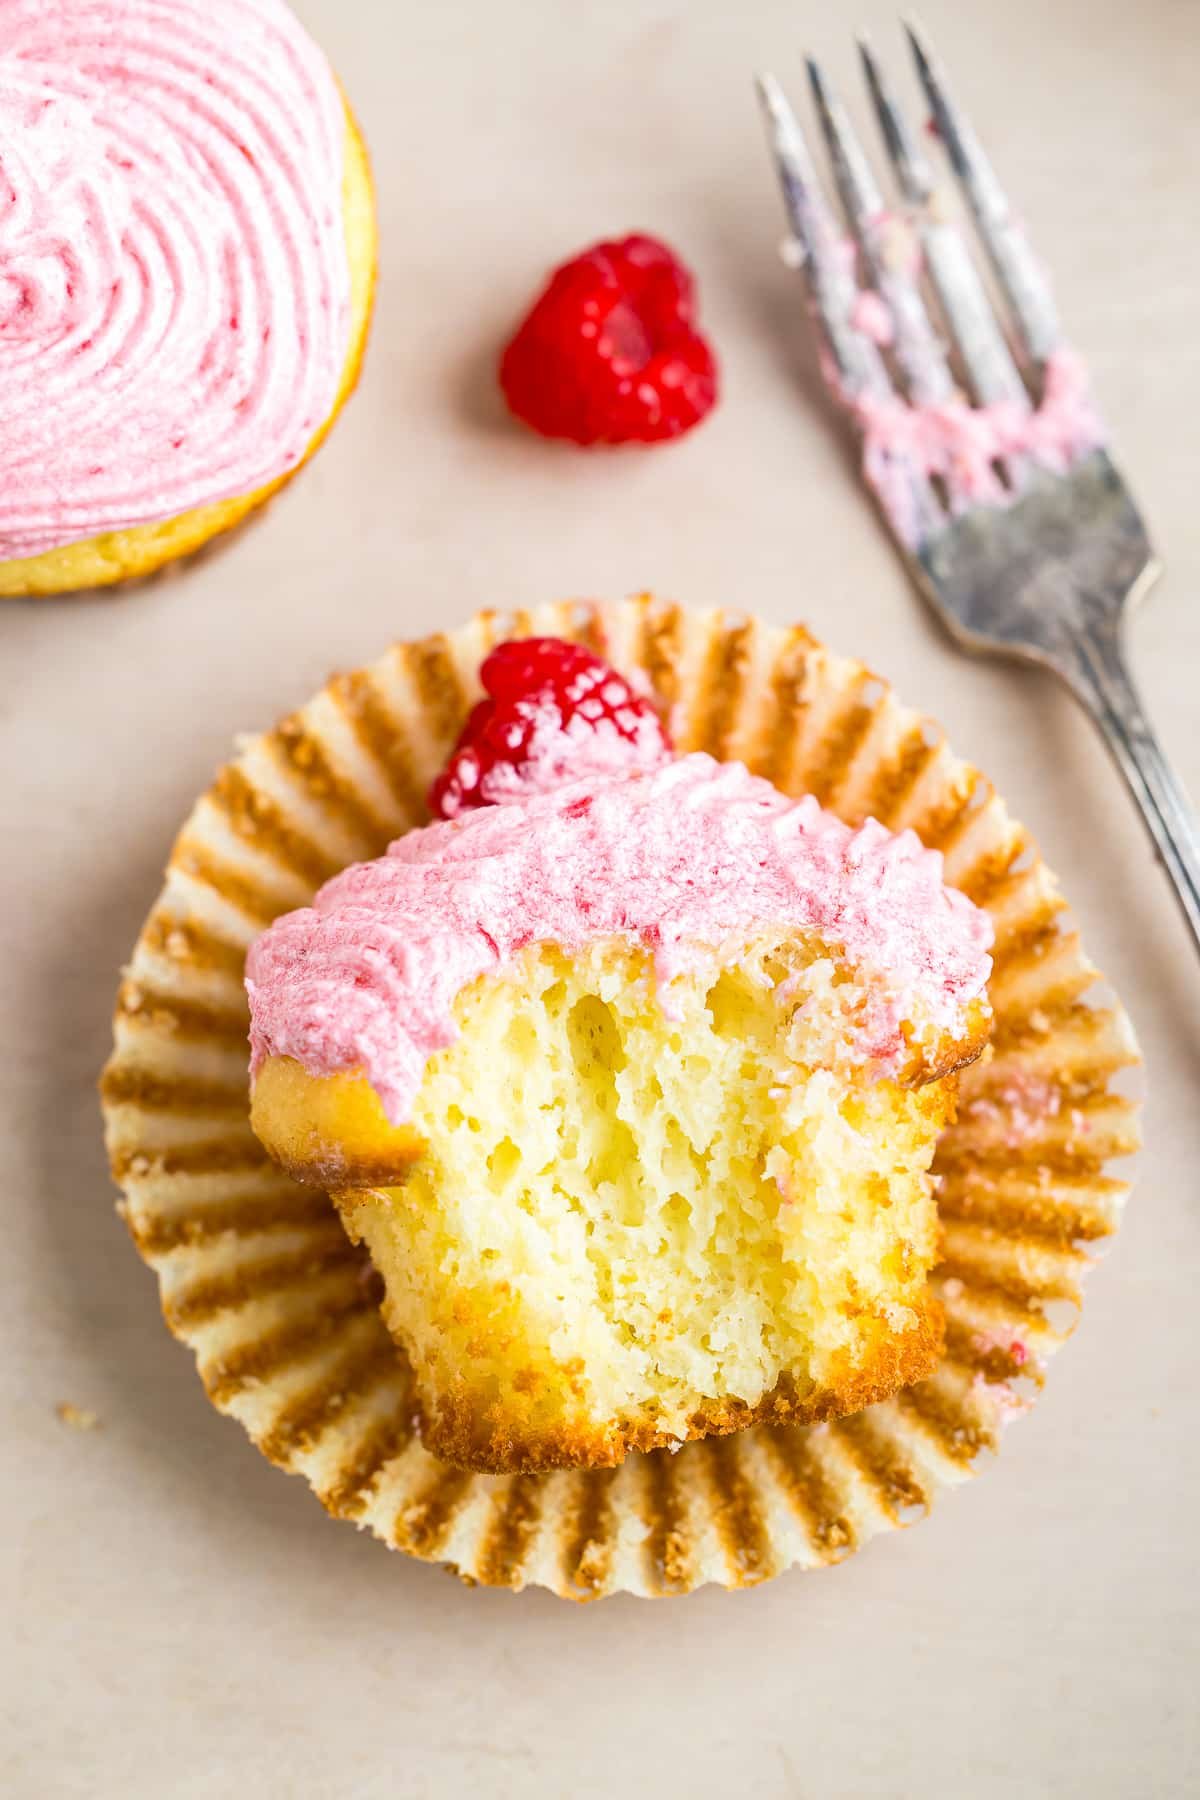 Raspberry Cupcakes on its side with a bite taken out